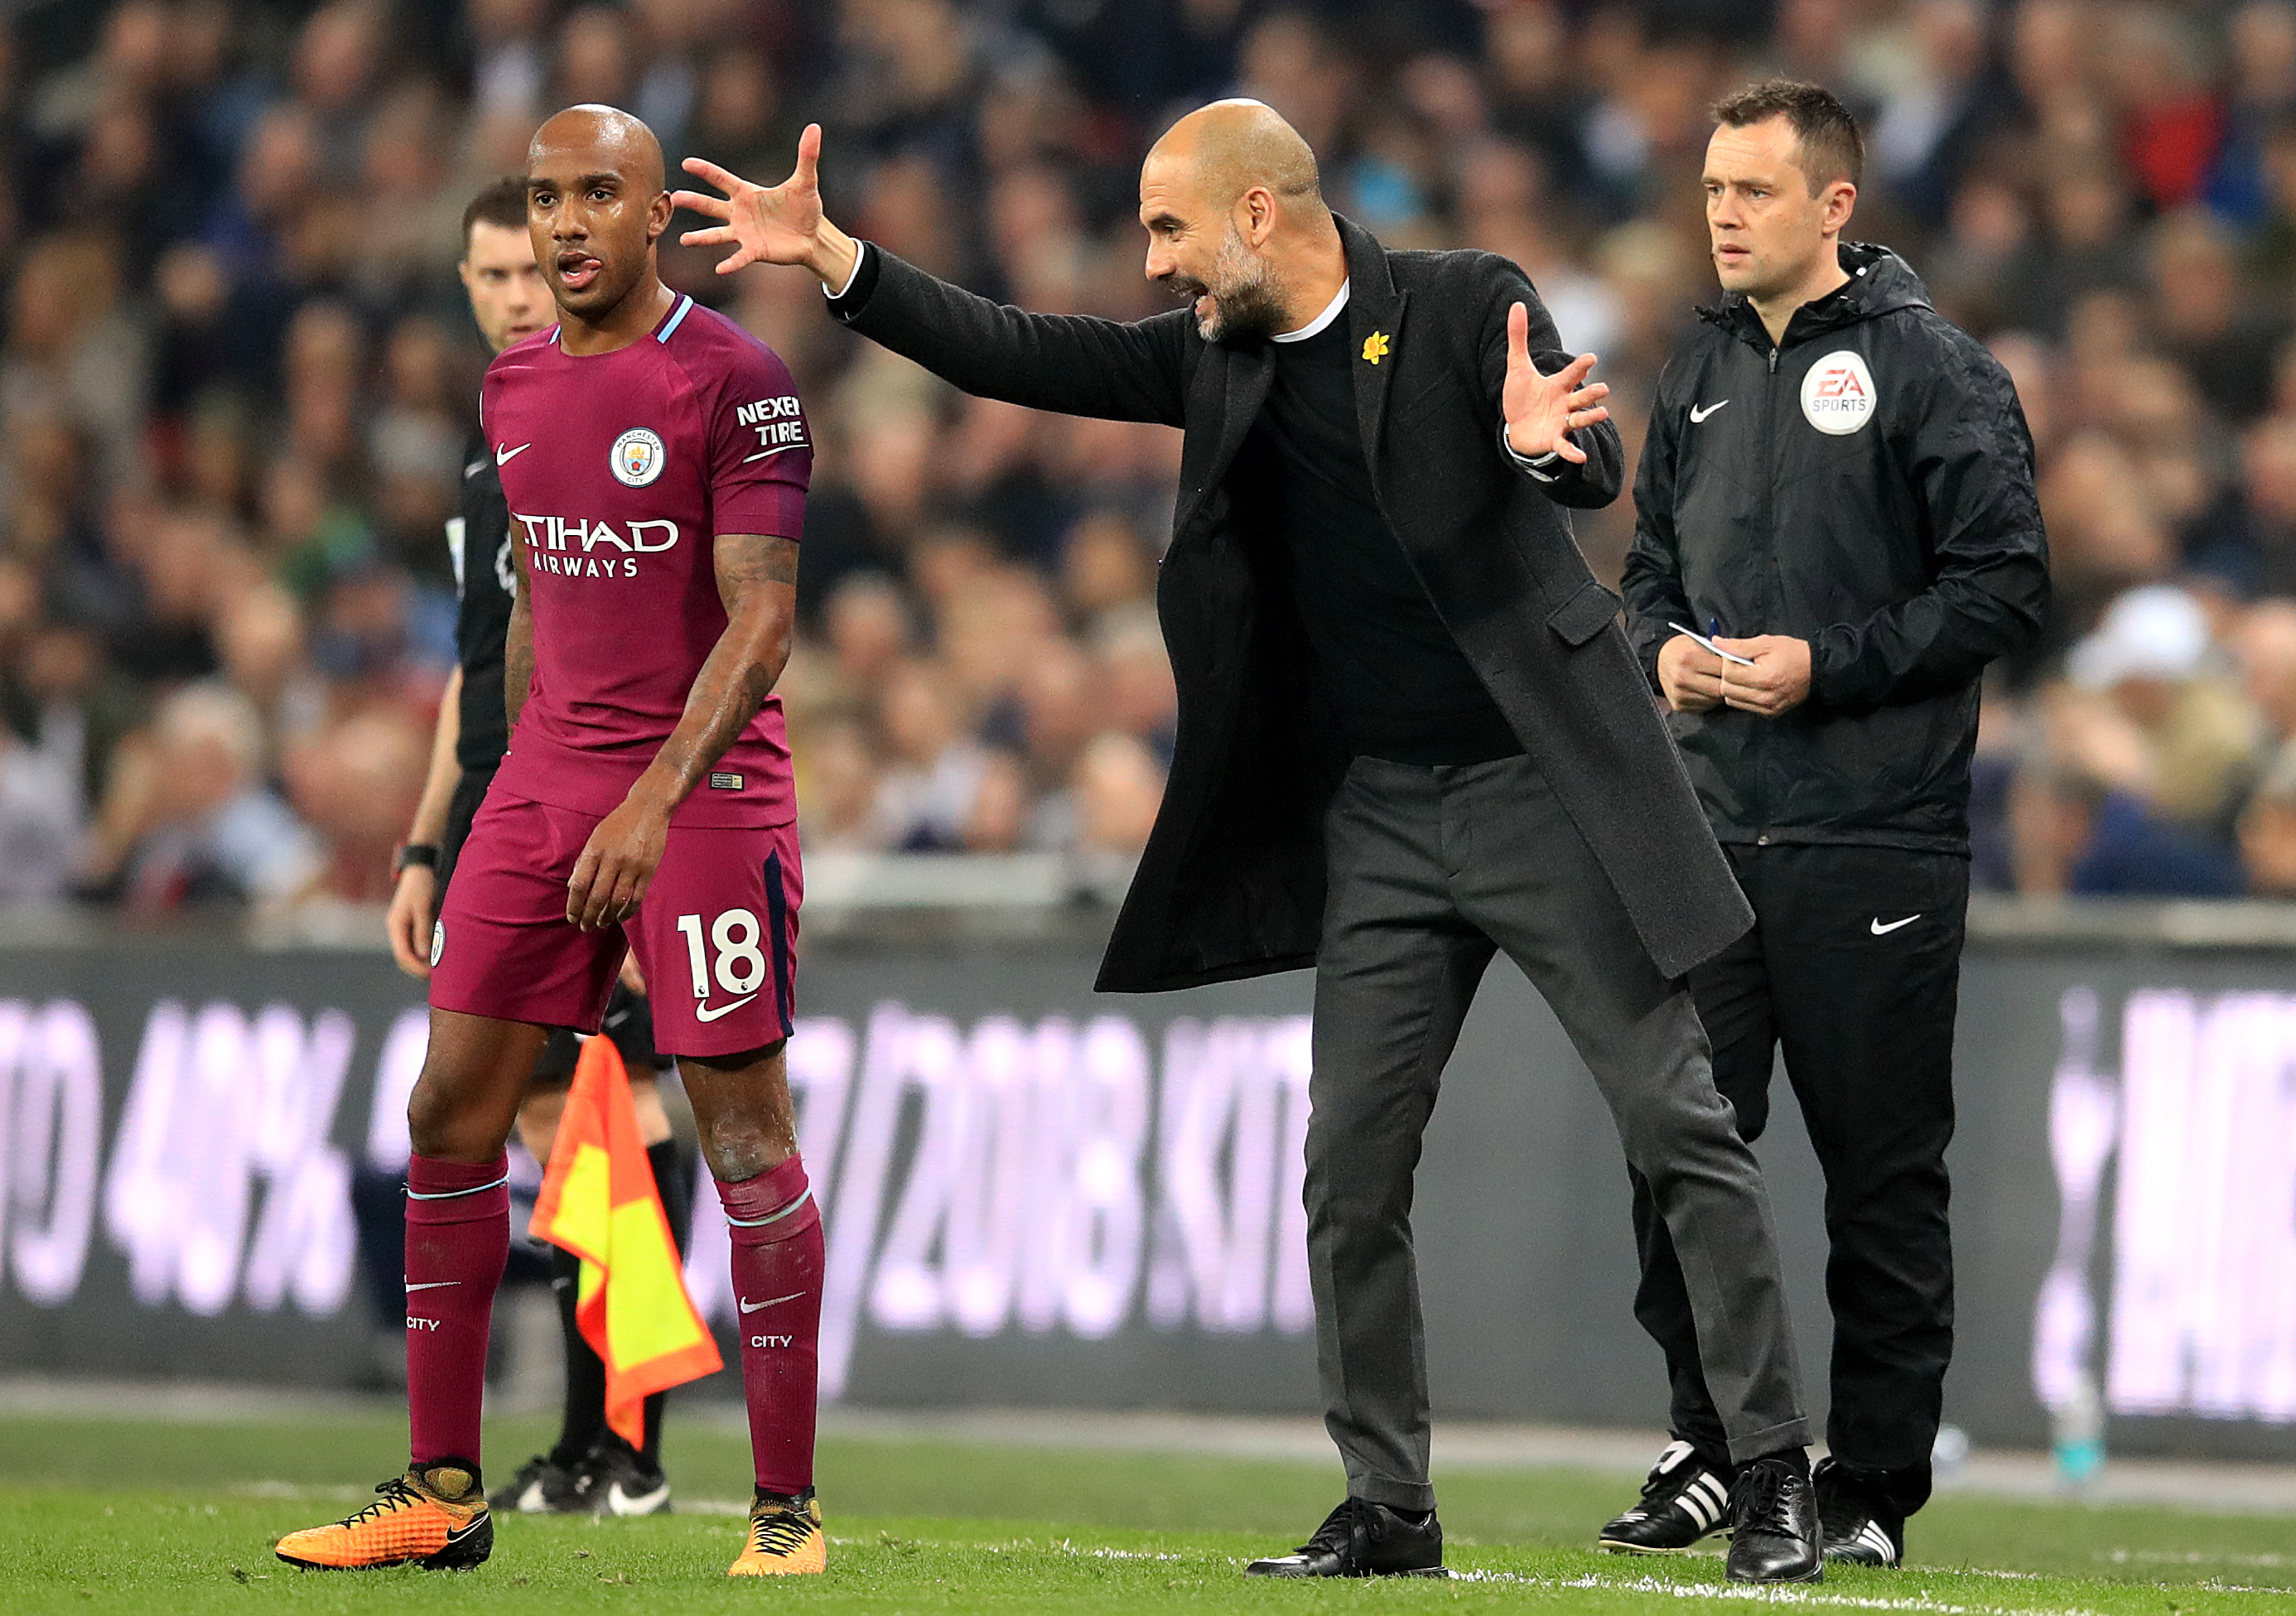 Manchester City manager Pep Guardiola gives instructions to Fabian Delph